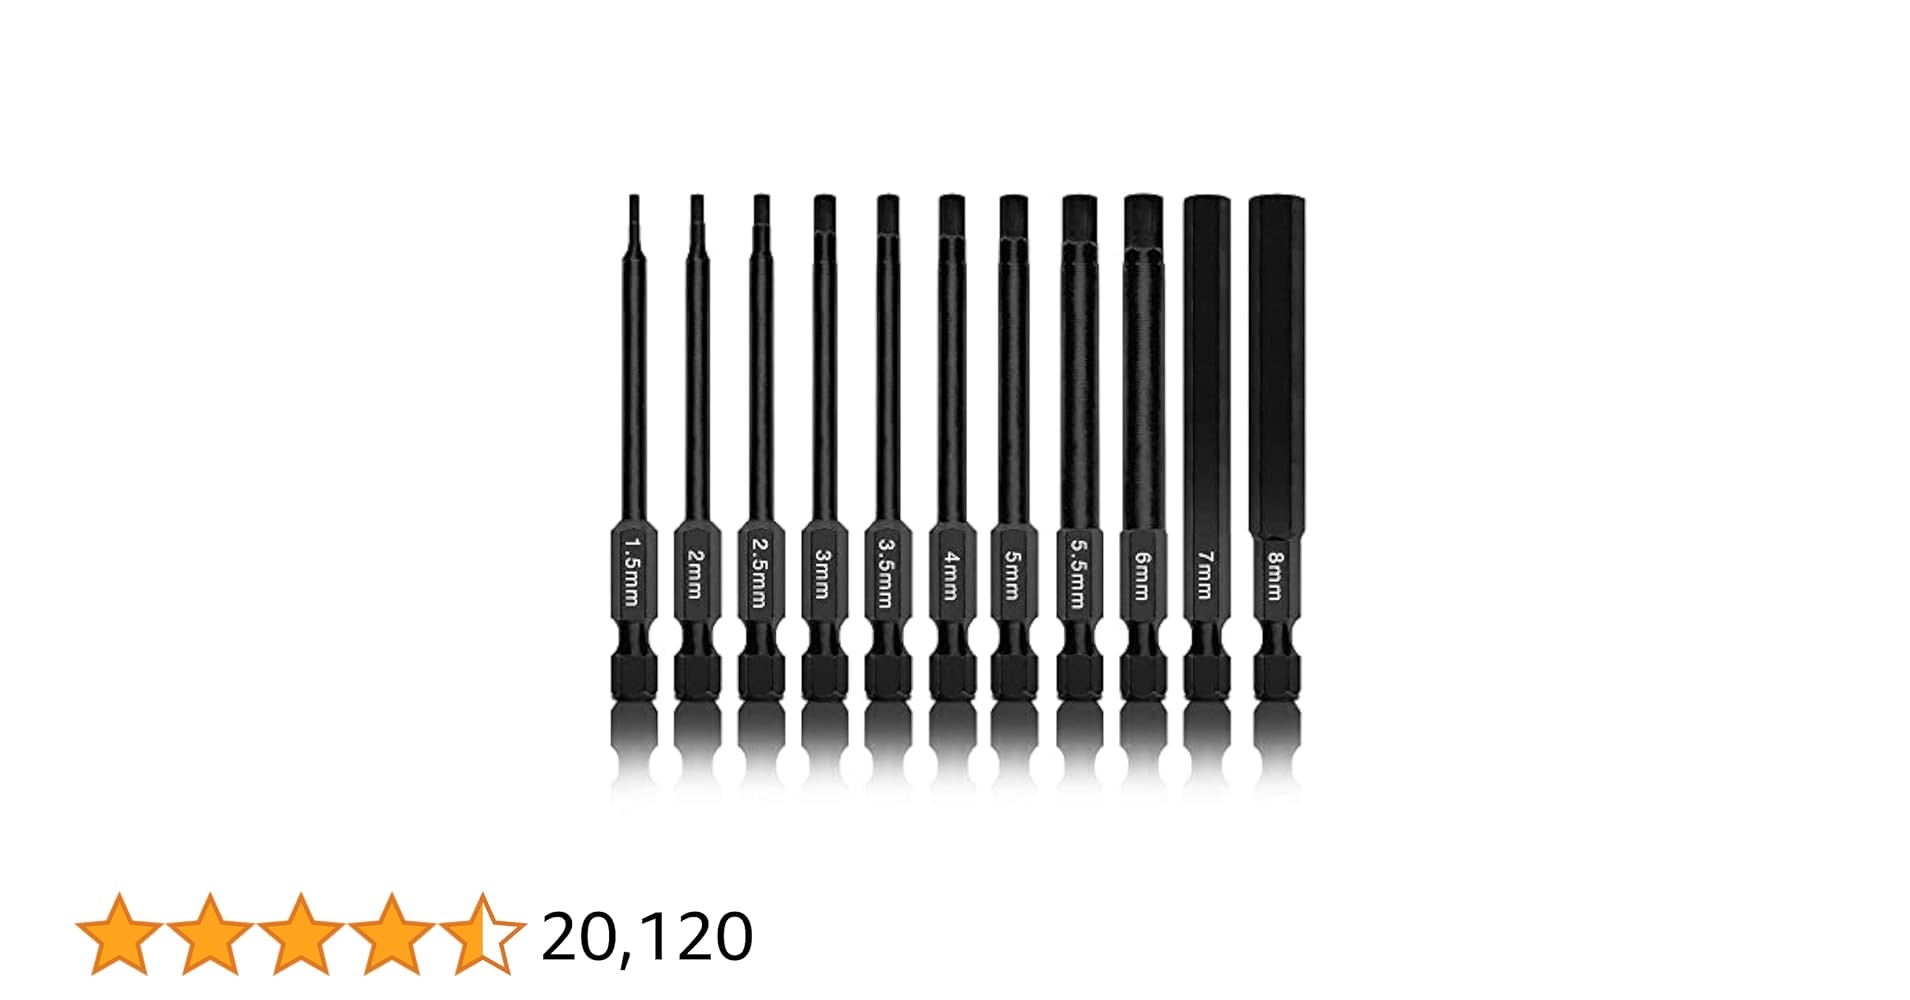 NEIKO 01148A Hex Allen Power Bit Set, 11-Piece Metric Sizes 1.5mm to 8mm | Magnetic Head Bits 3 Quick Release Shanks Premium S2 Steel Compatible with Drills and Impact Drivers